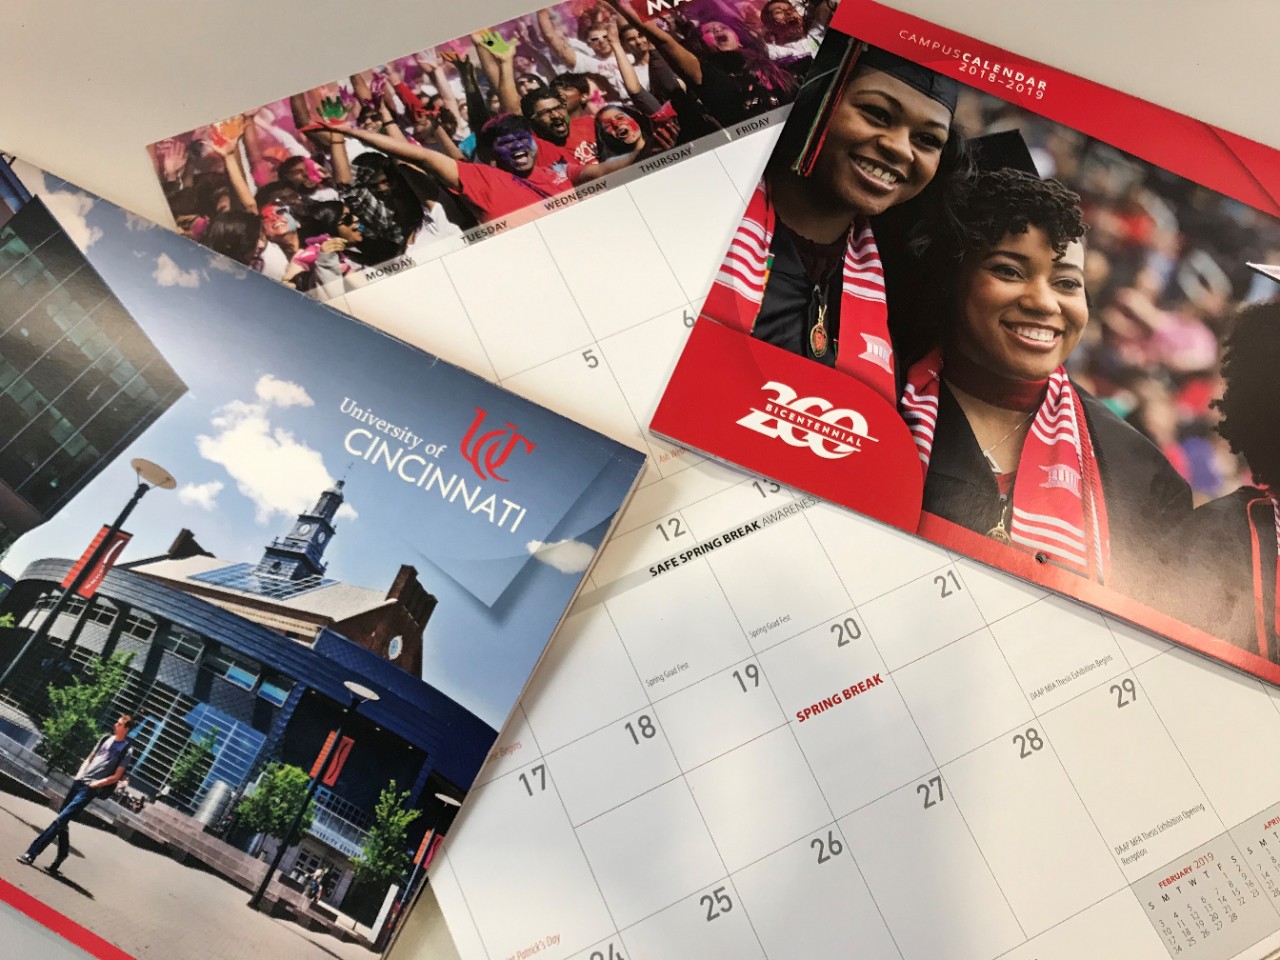 Campus calendars from past academic years